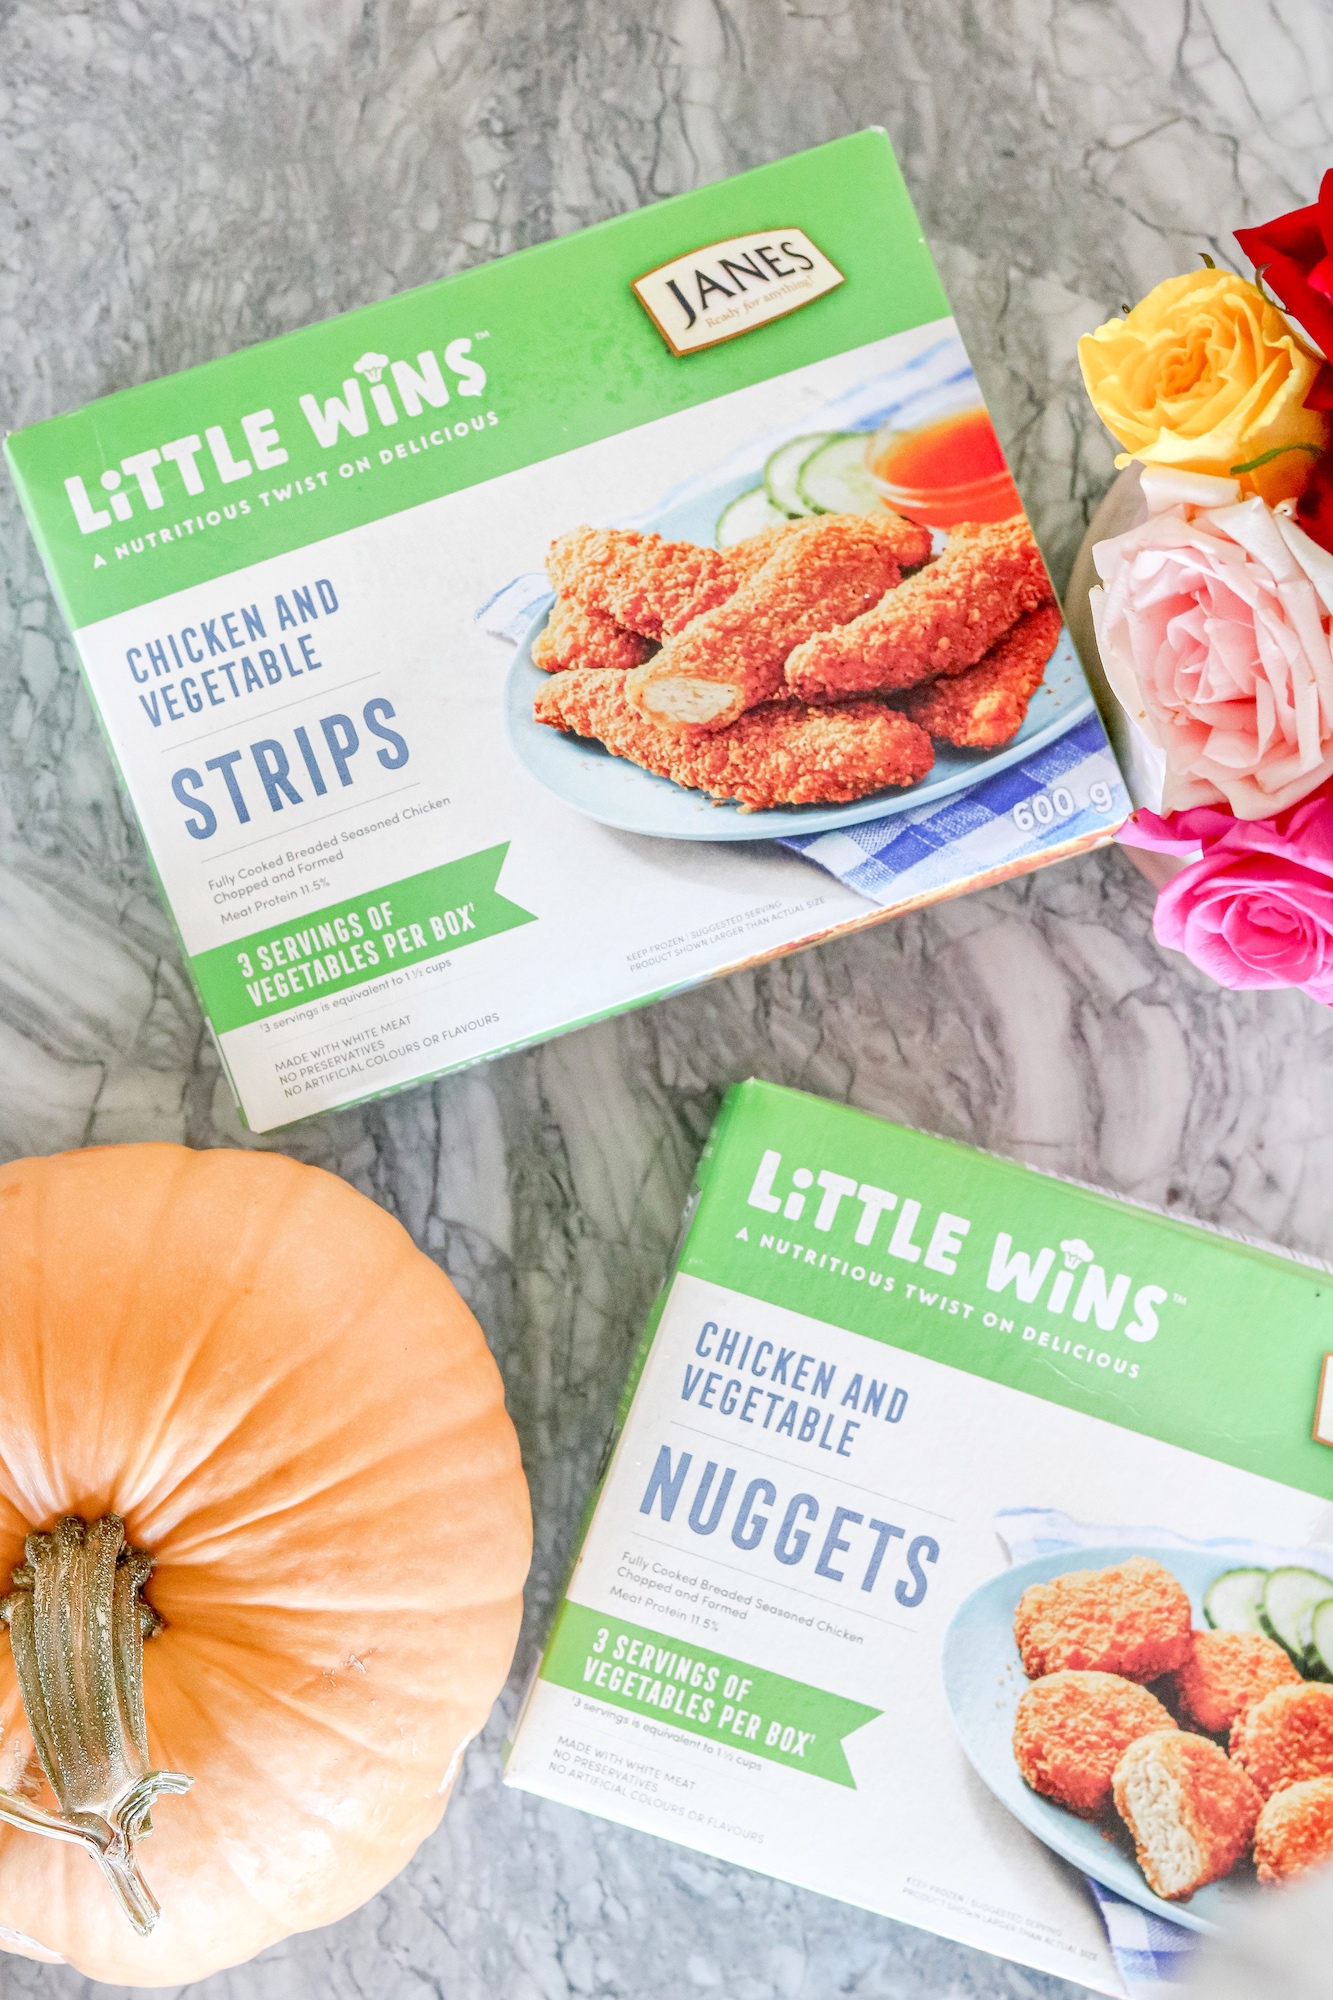 Little Wins by Janes chicken and vegetable strips